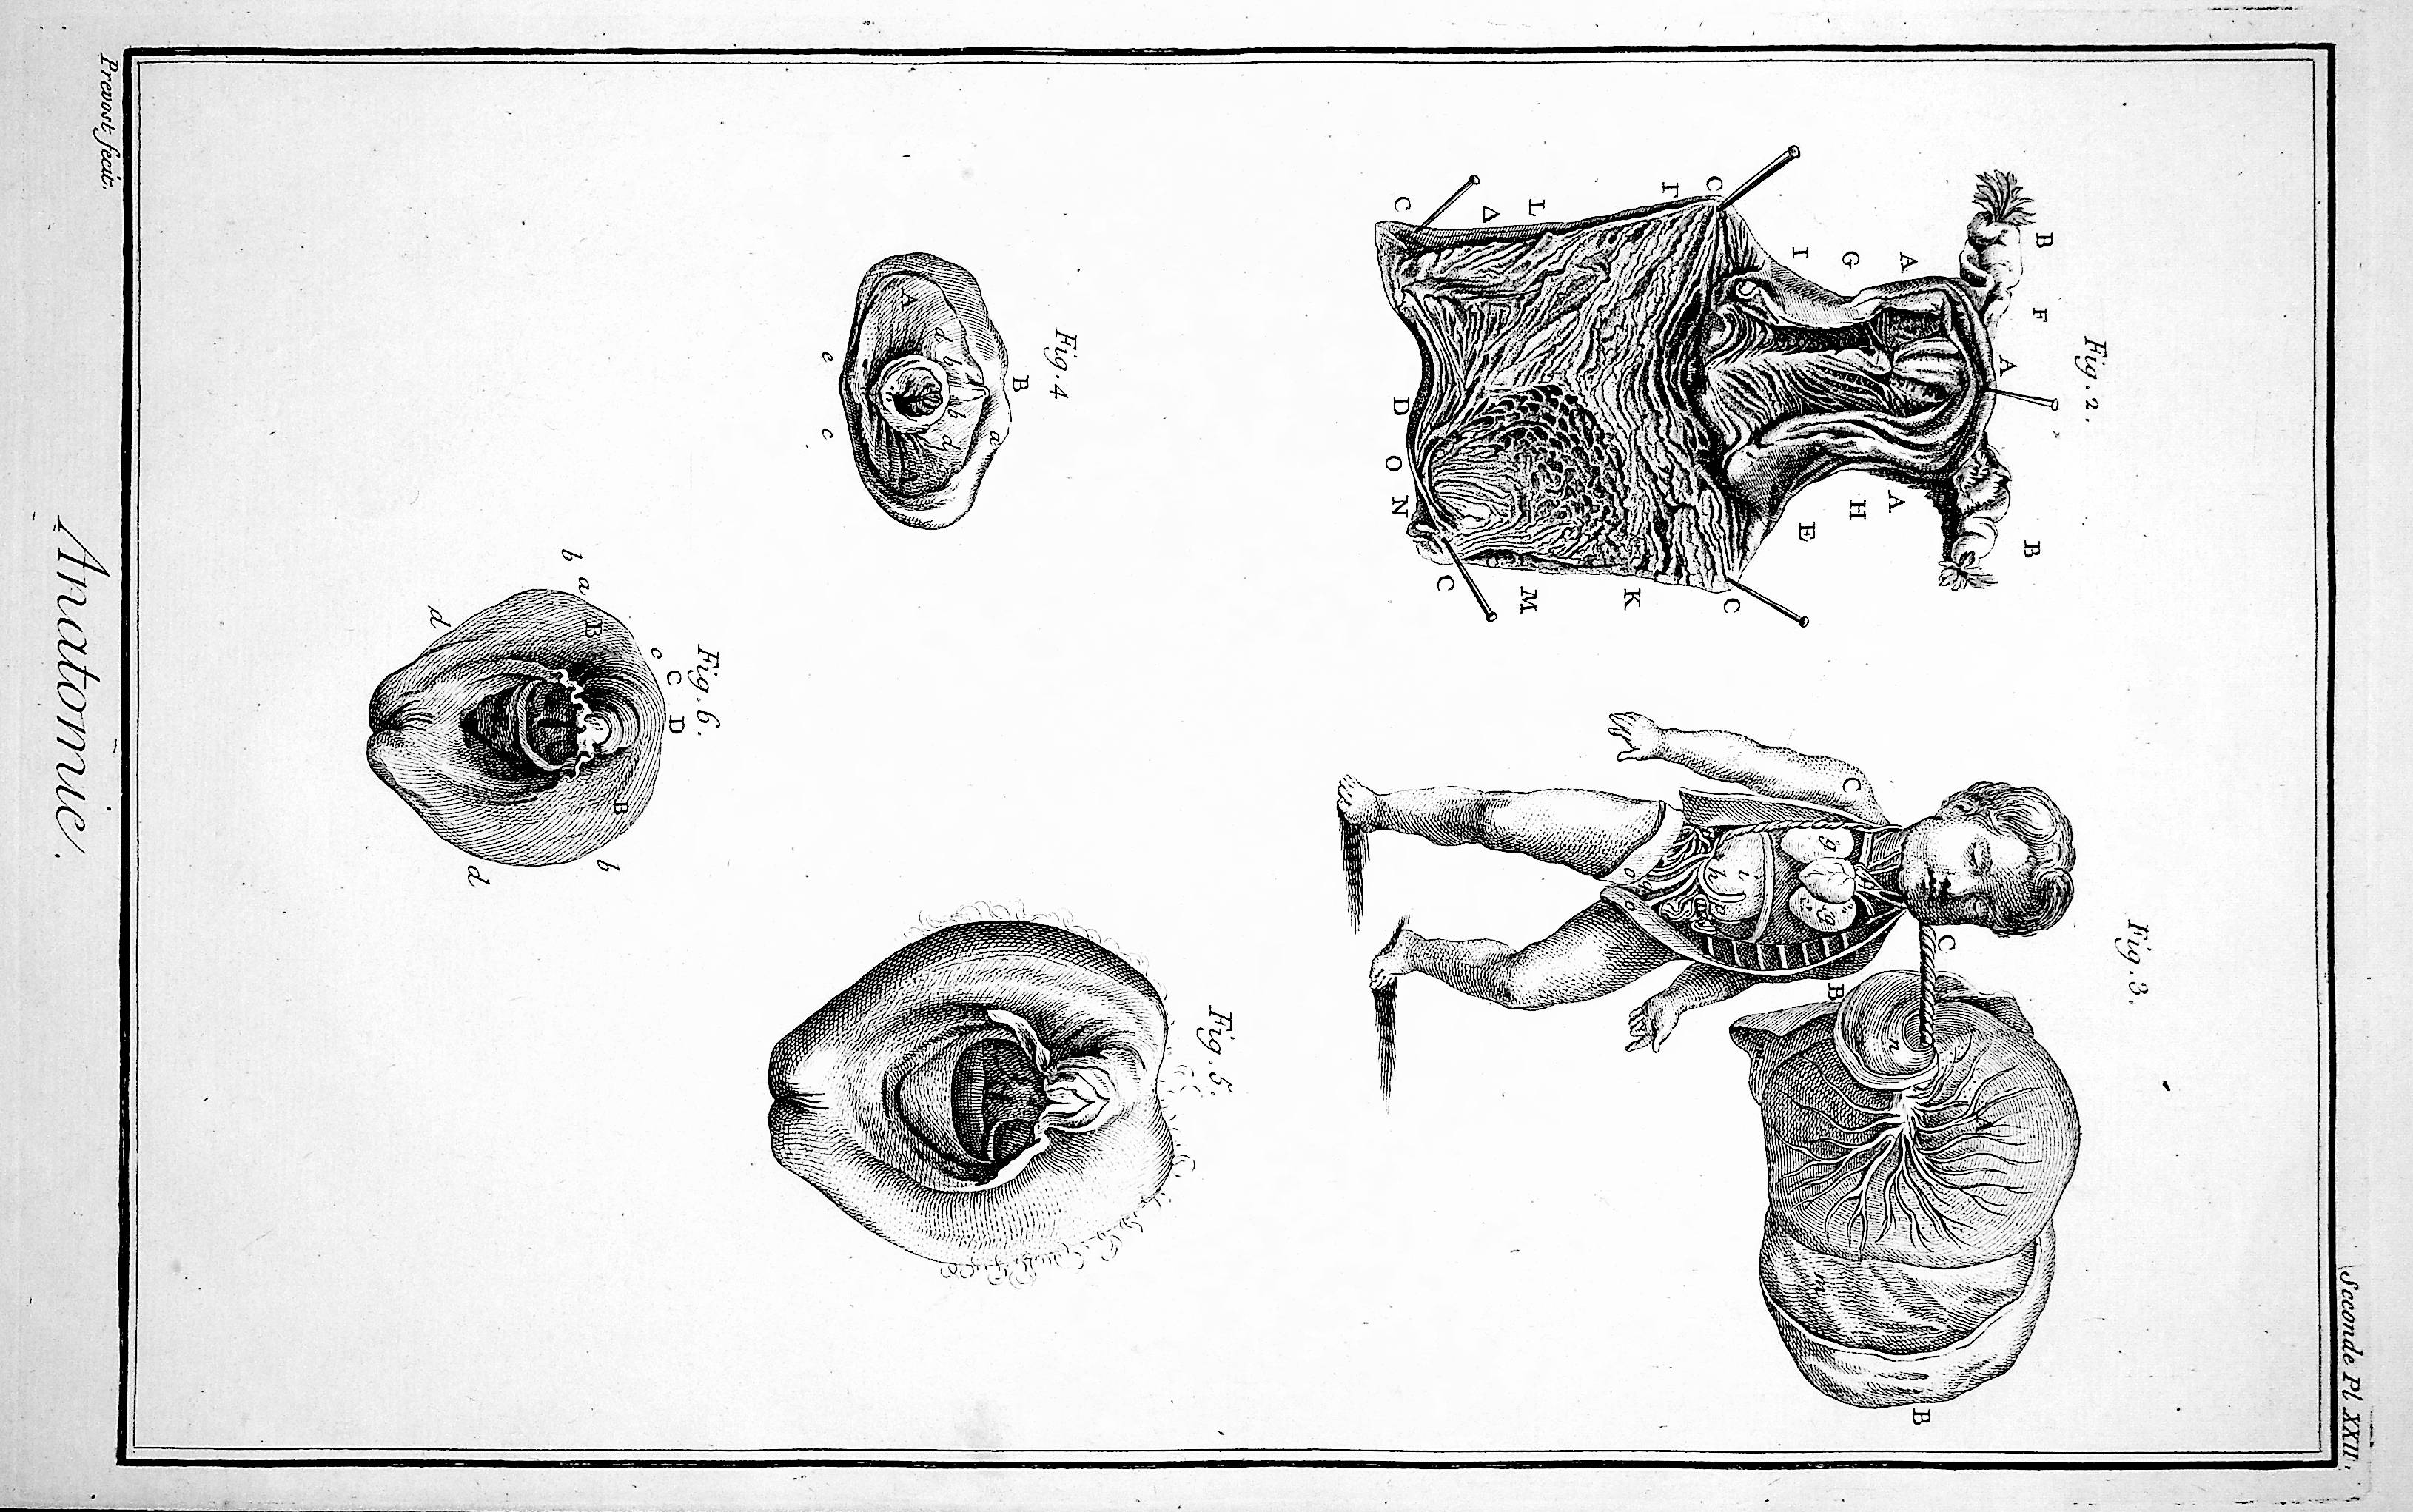 Image for Encyclopedie, Anatomie Plate XXII. The matrix [female reproductive organs], after Haller, TOGETHER WITH Plate XXII No 2. Details of the matrix [and fetus], after Haller, Kulm & Huber